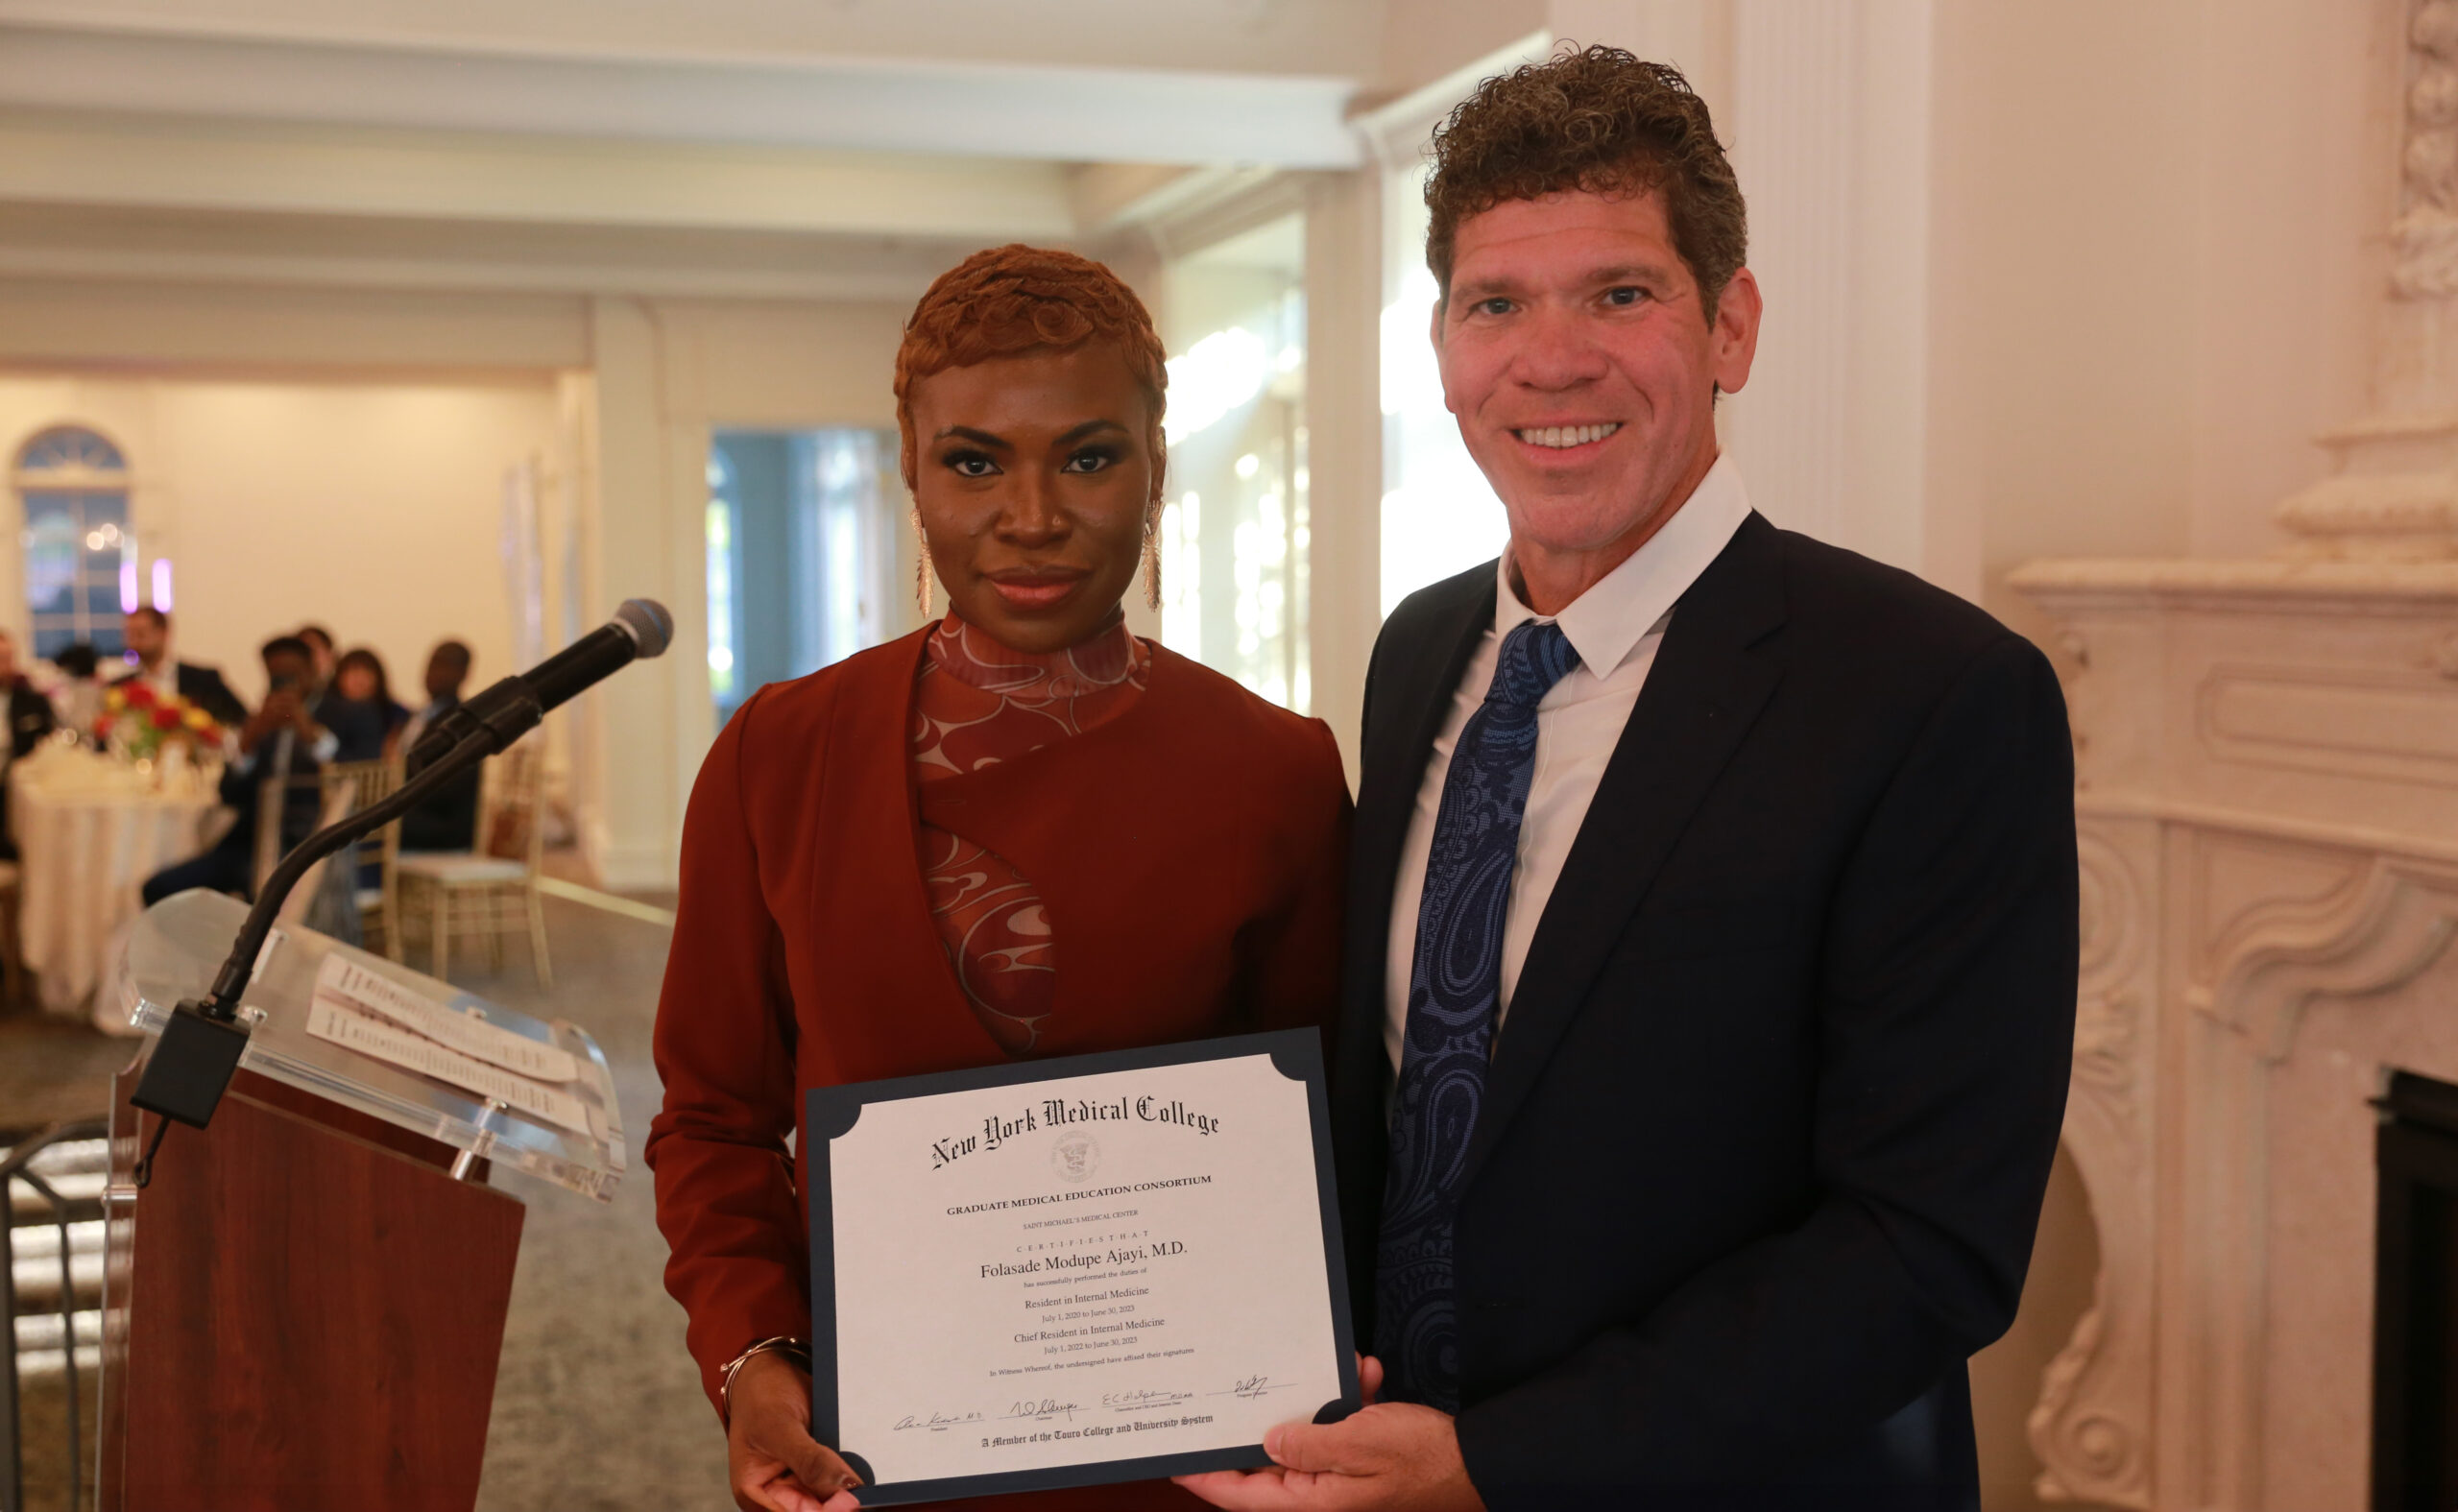 Folasade Ajayi, MD, poses with her certificate with Theodore DaCosta, director of Saint Michael’s residency program.